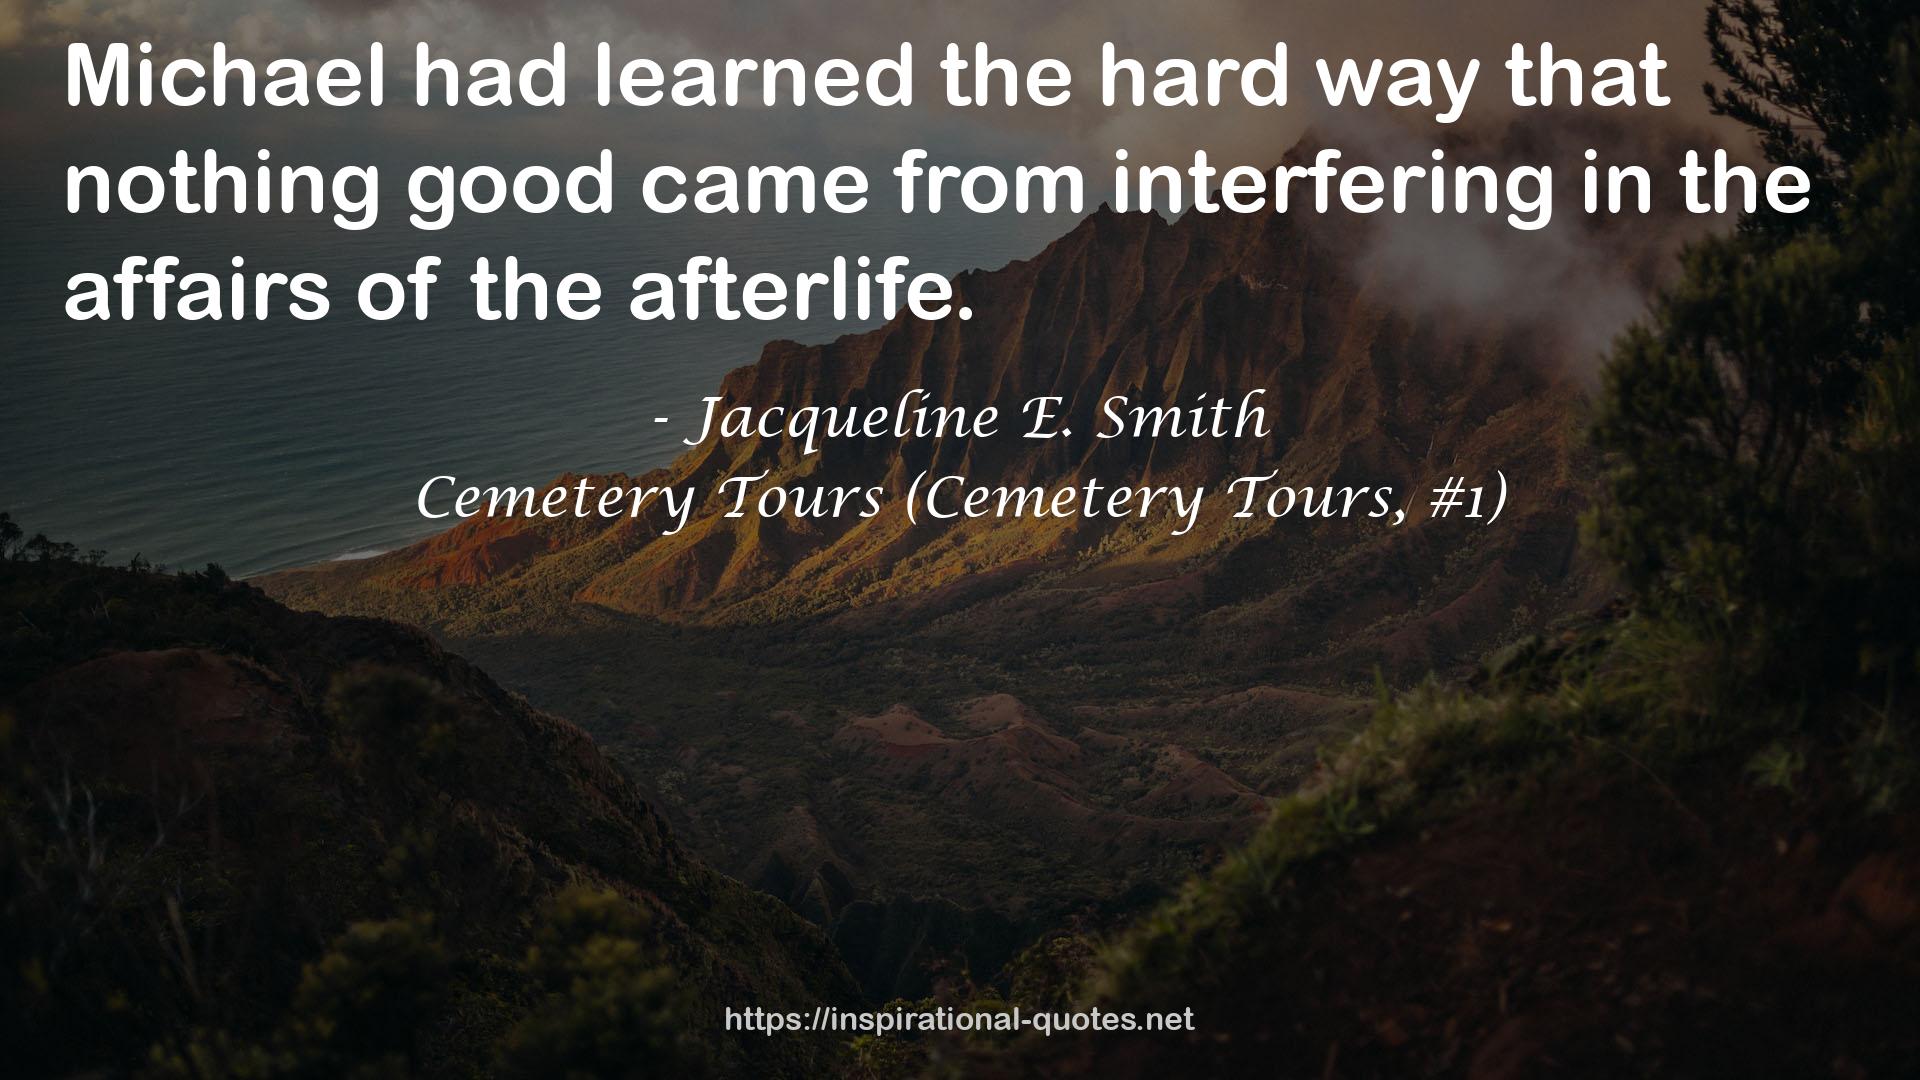 Cemetery Tours (Cemetery Tours, #1) QUOTES